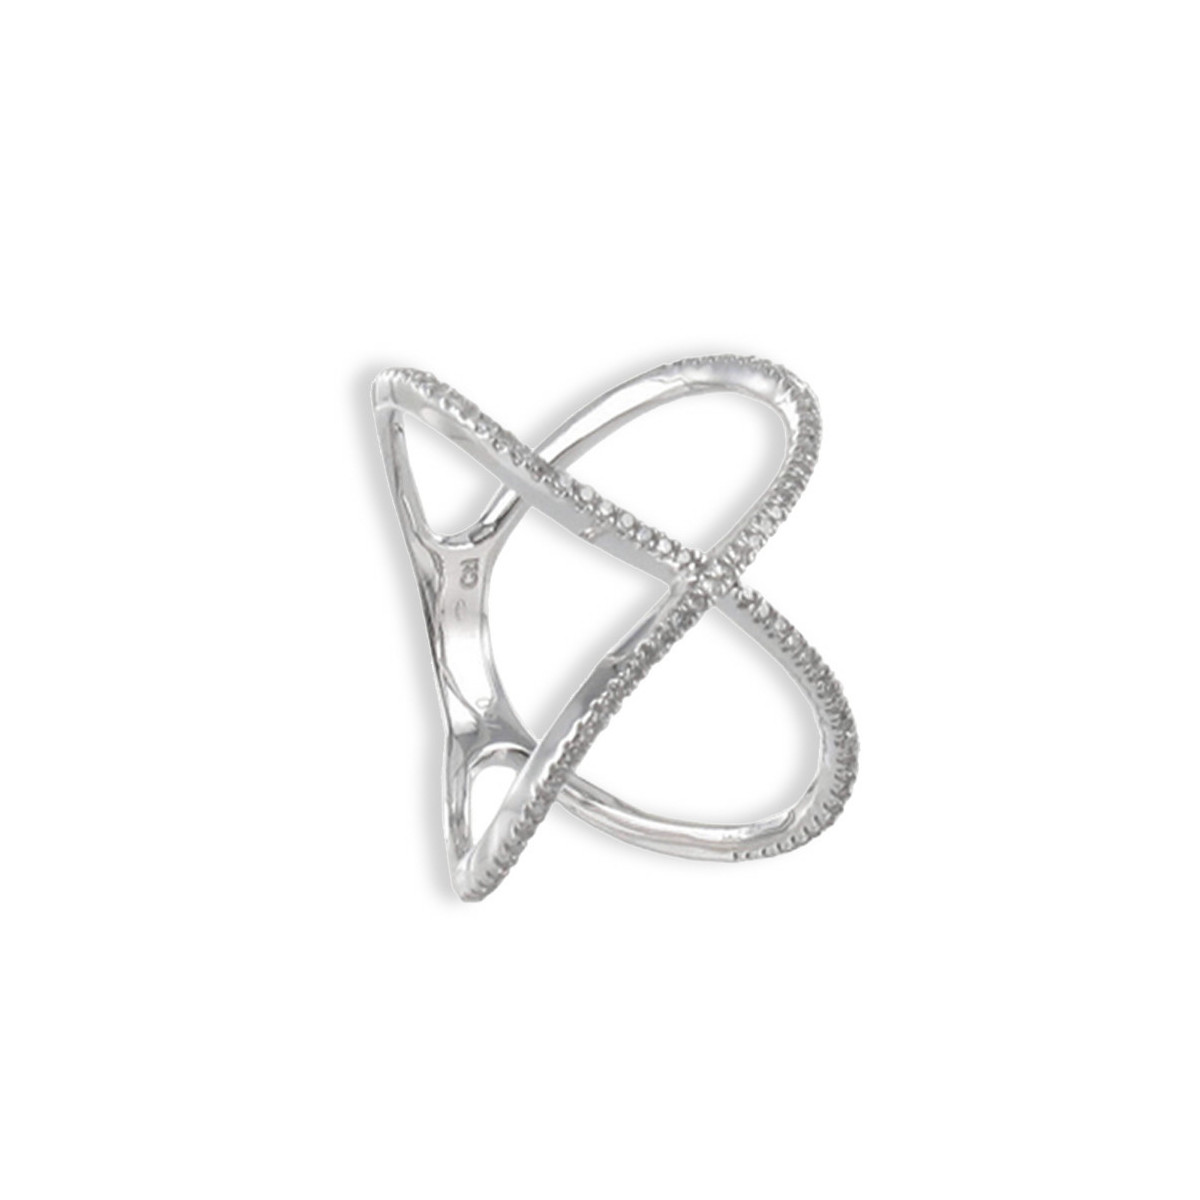 CROSSED RING WITH DIAMONDS